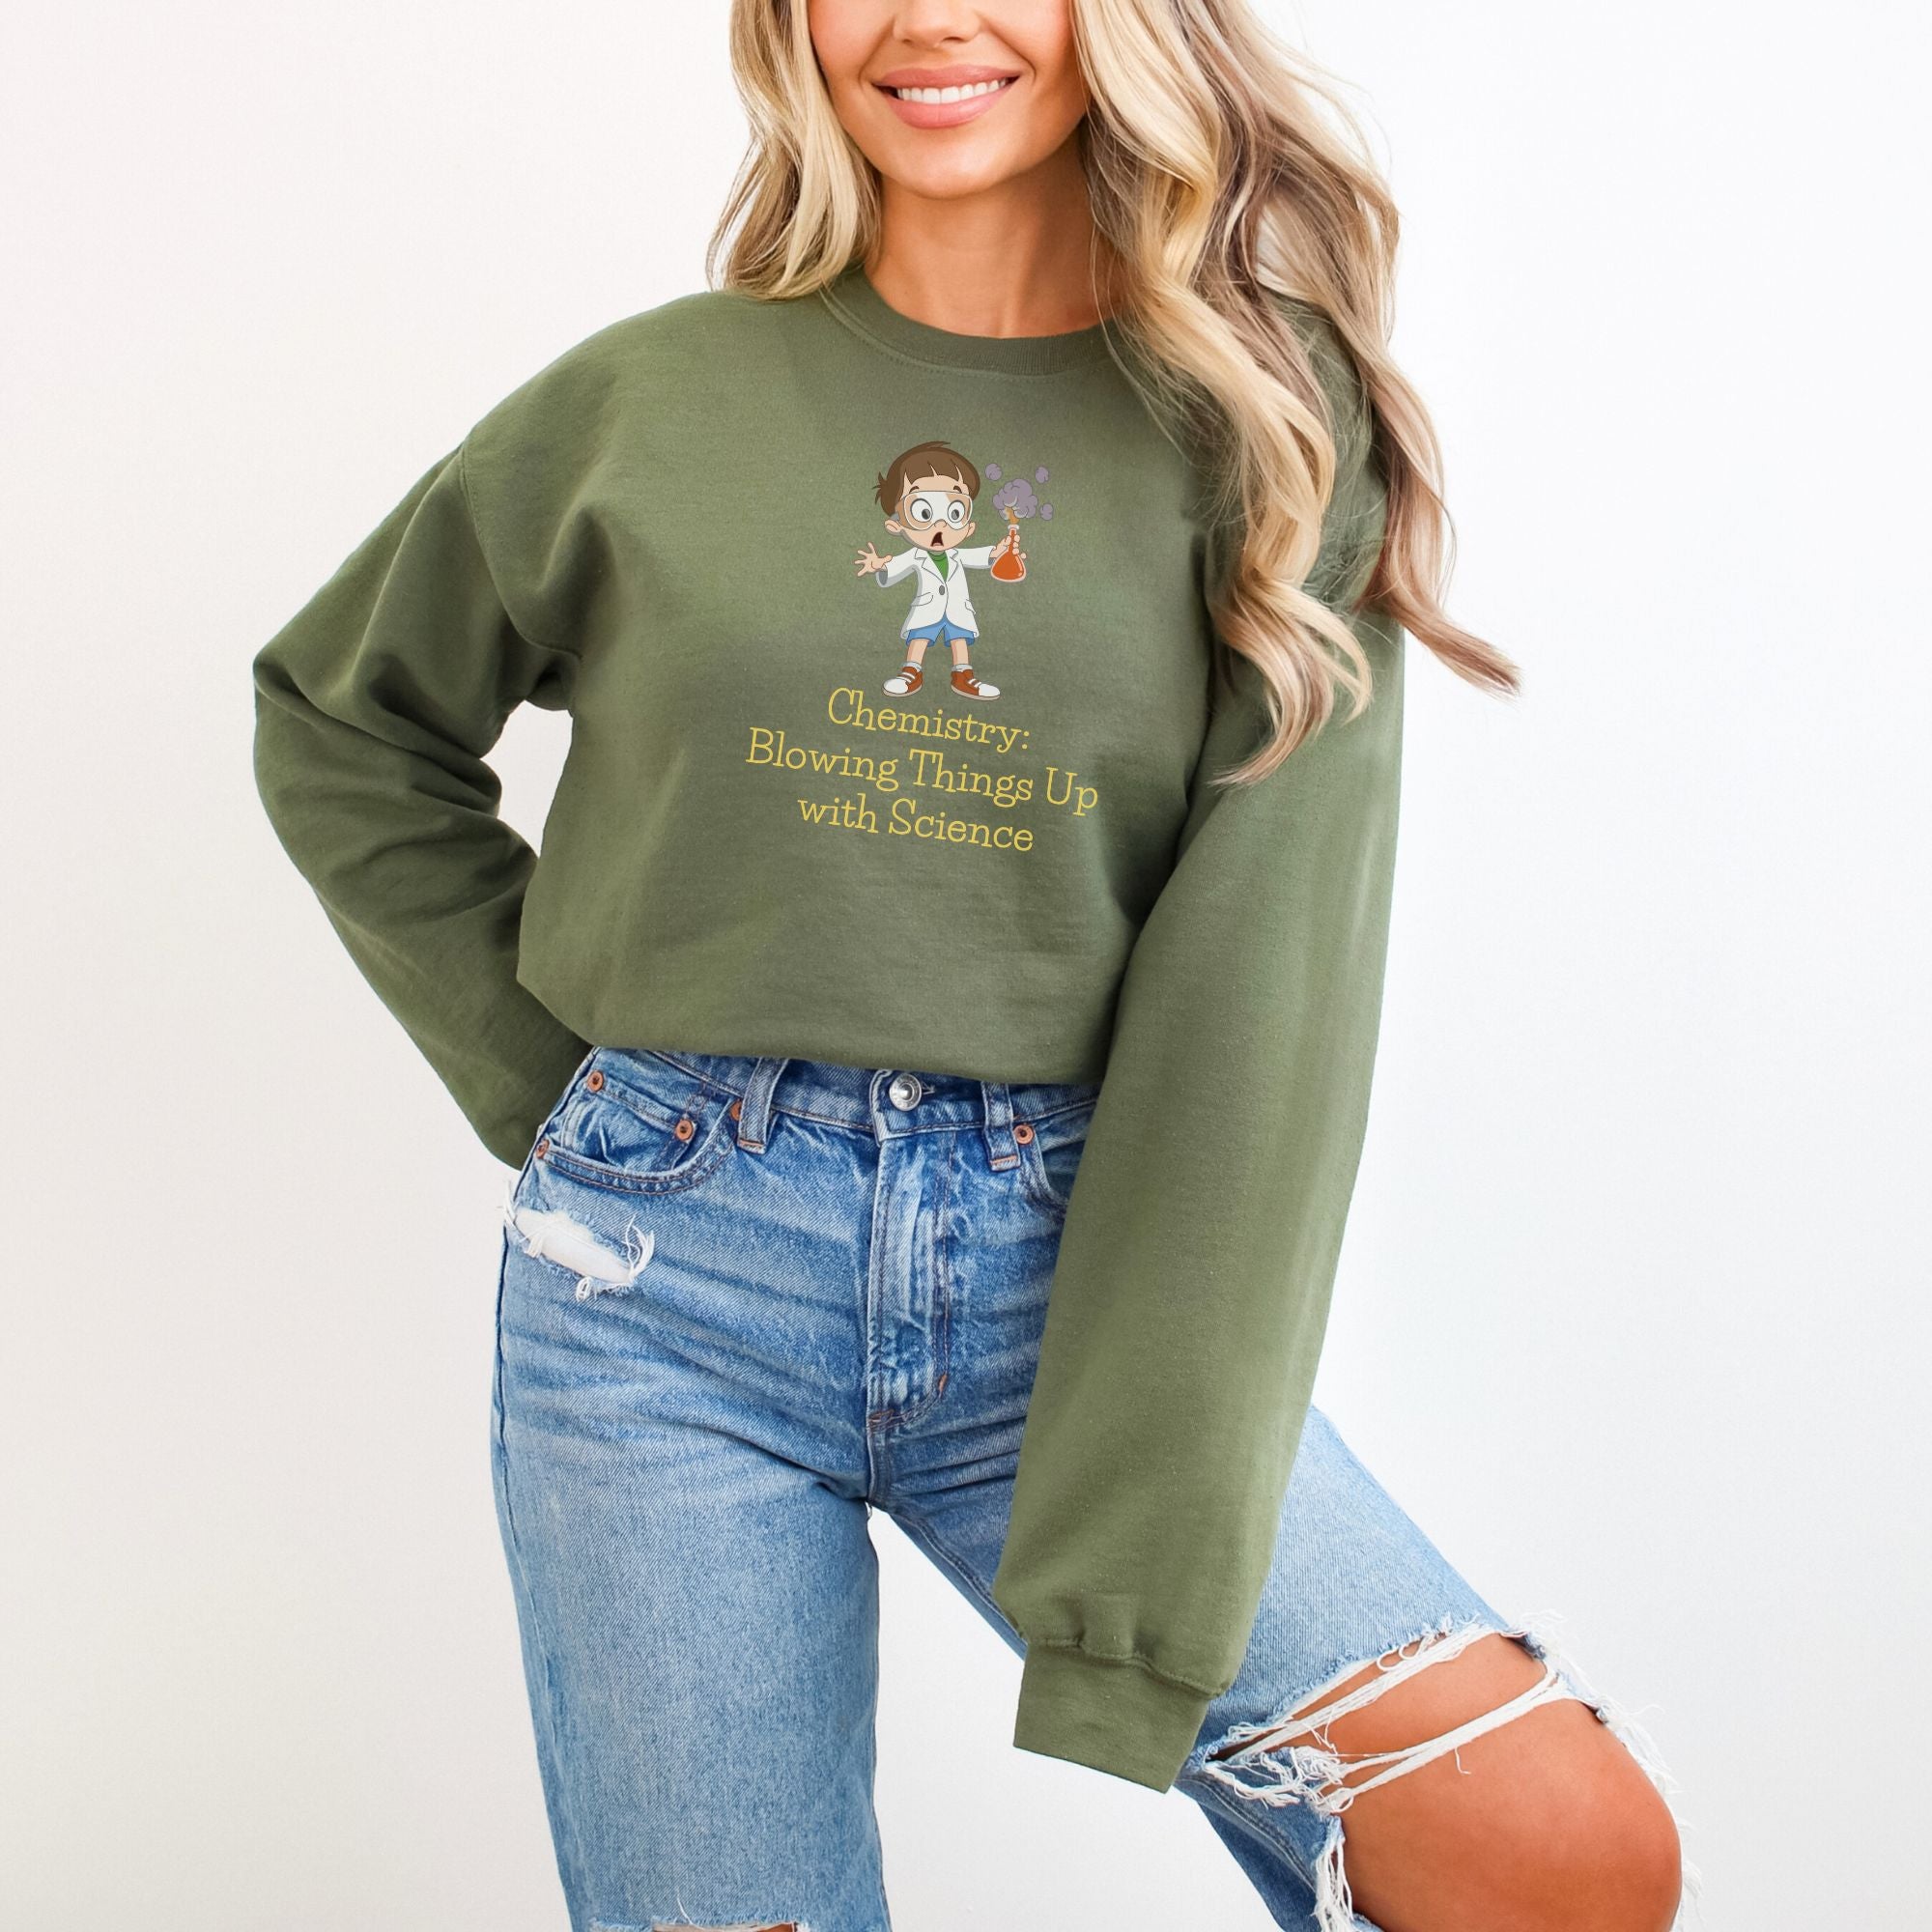 smiling woman wearing a military green sweater with a design that says "chemistry: blowing things up with science"